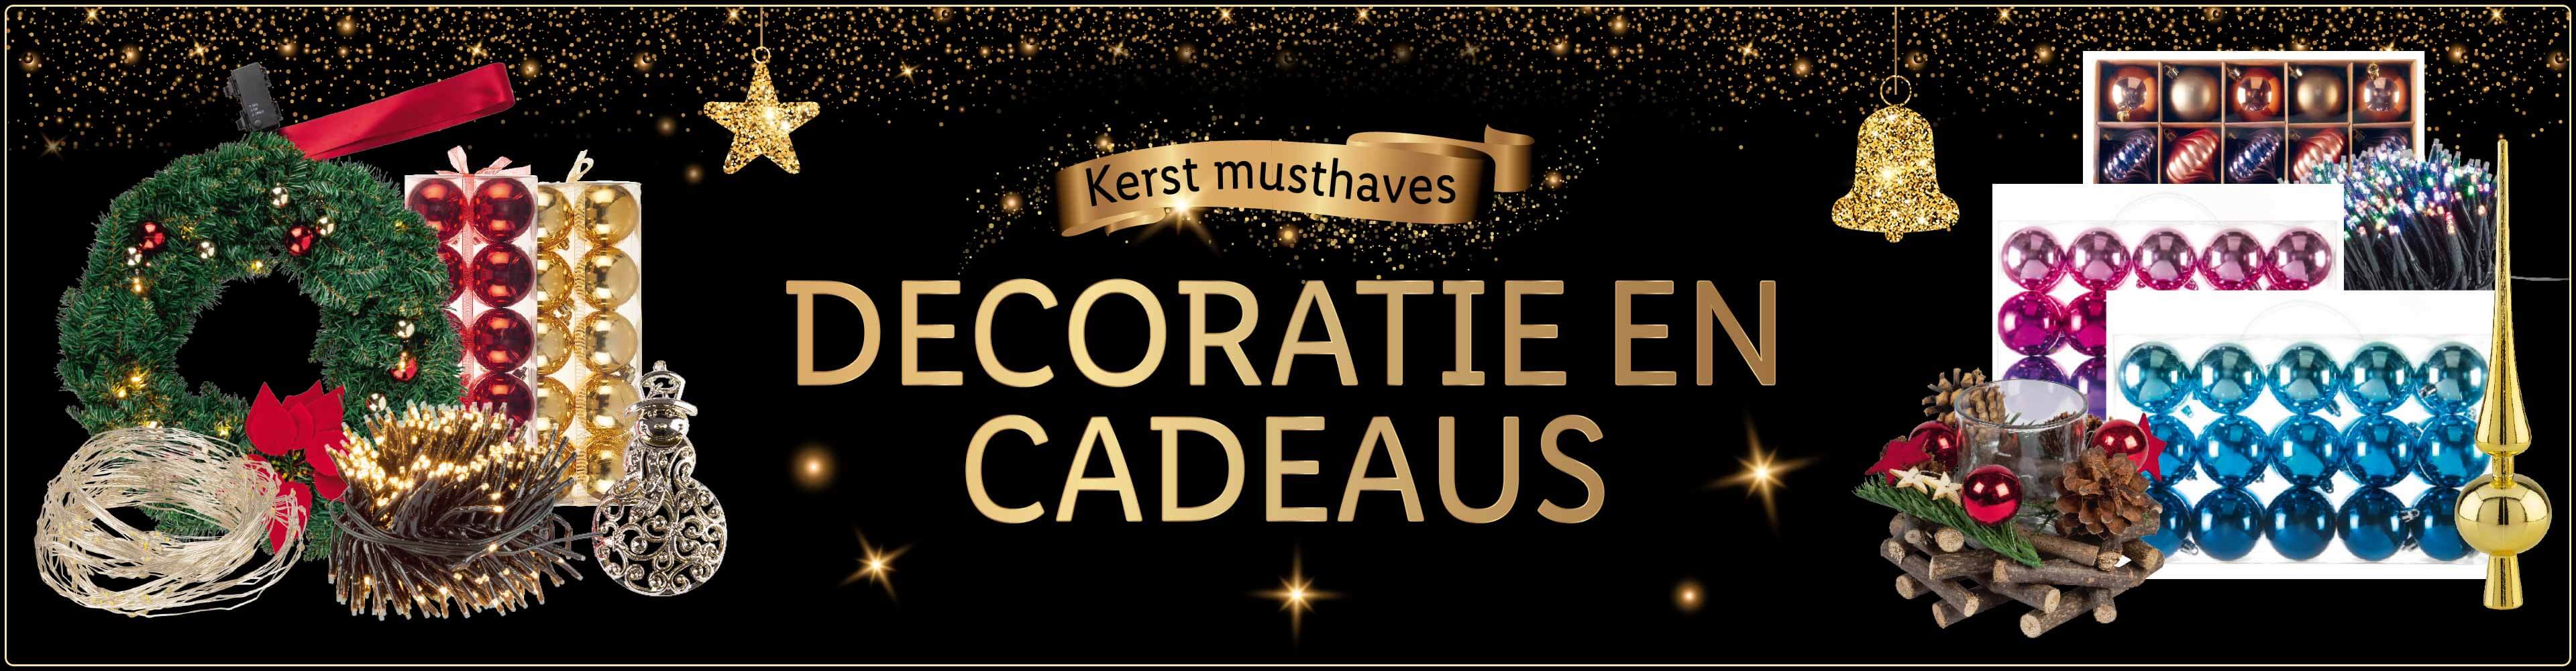 Kerst musthaves